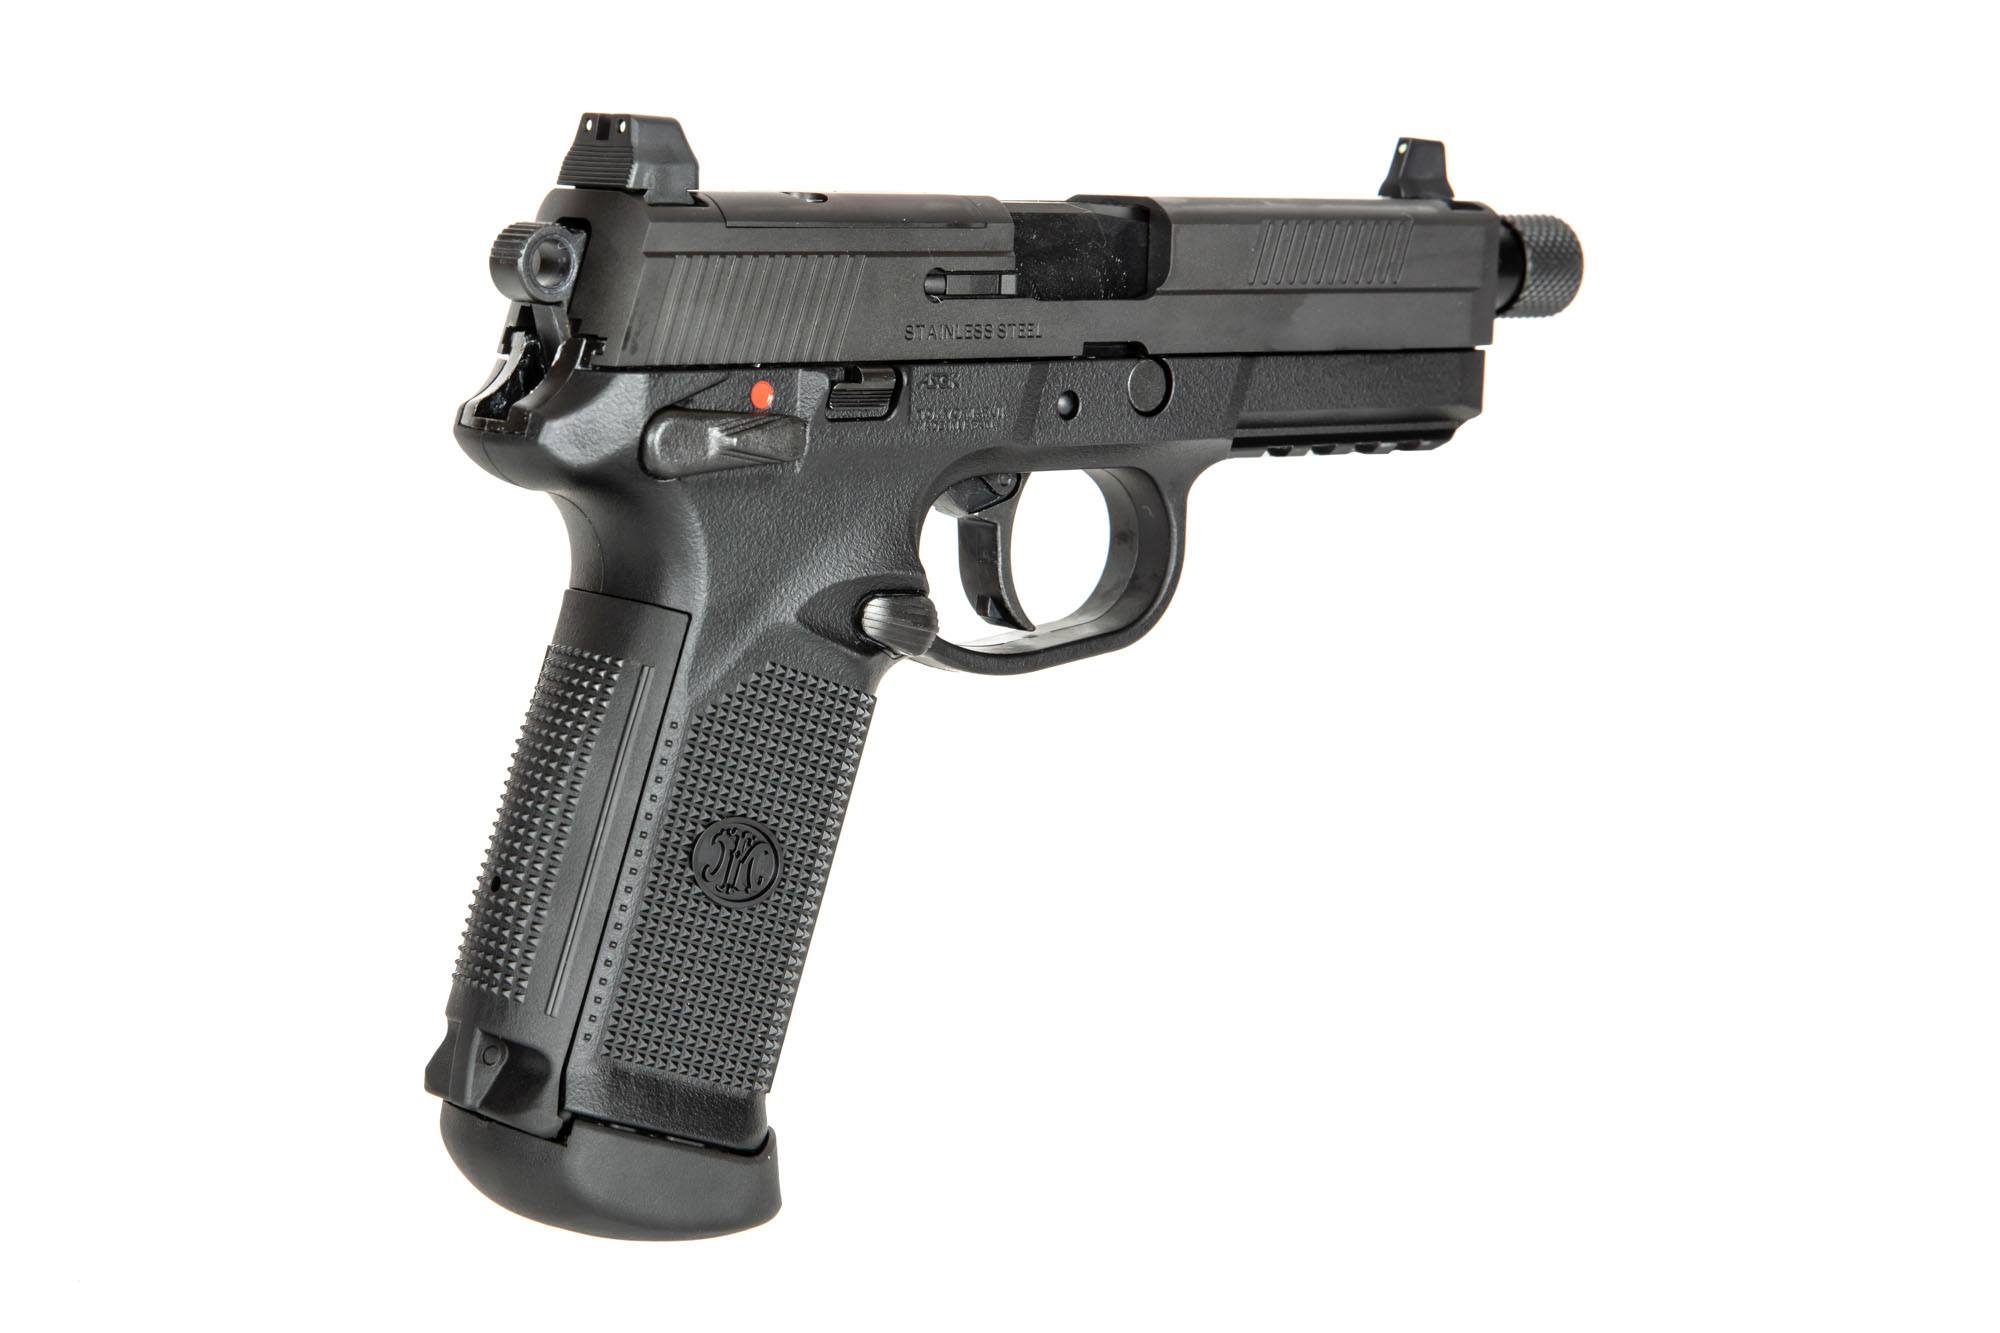 FNX-45 Tactical Pistol Replica - black by Tokyo Marui on Airsoft Mania Europe